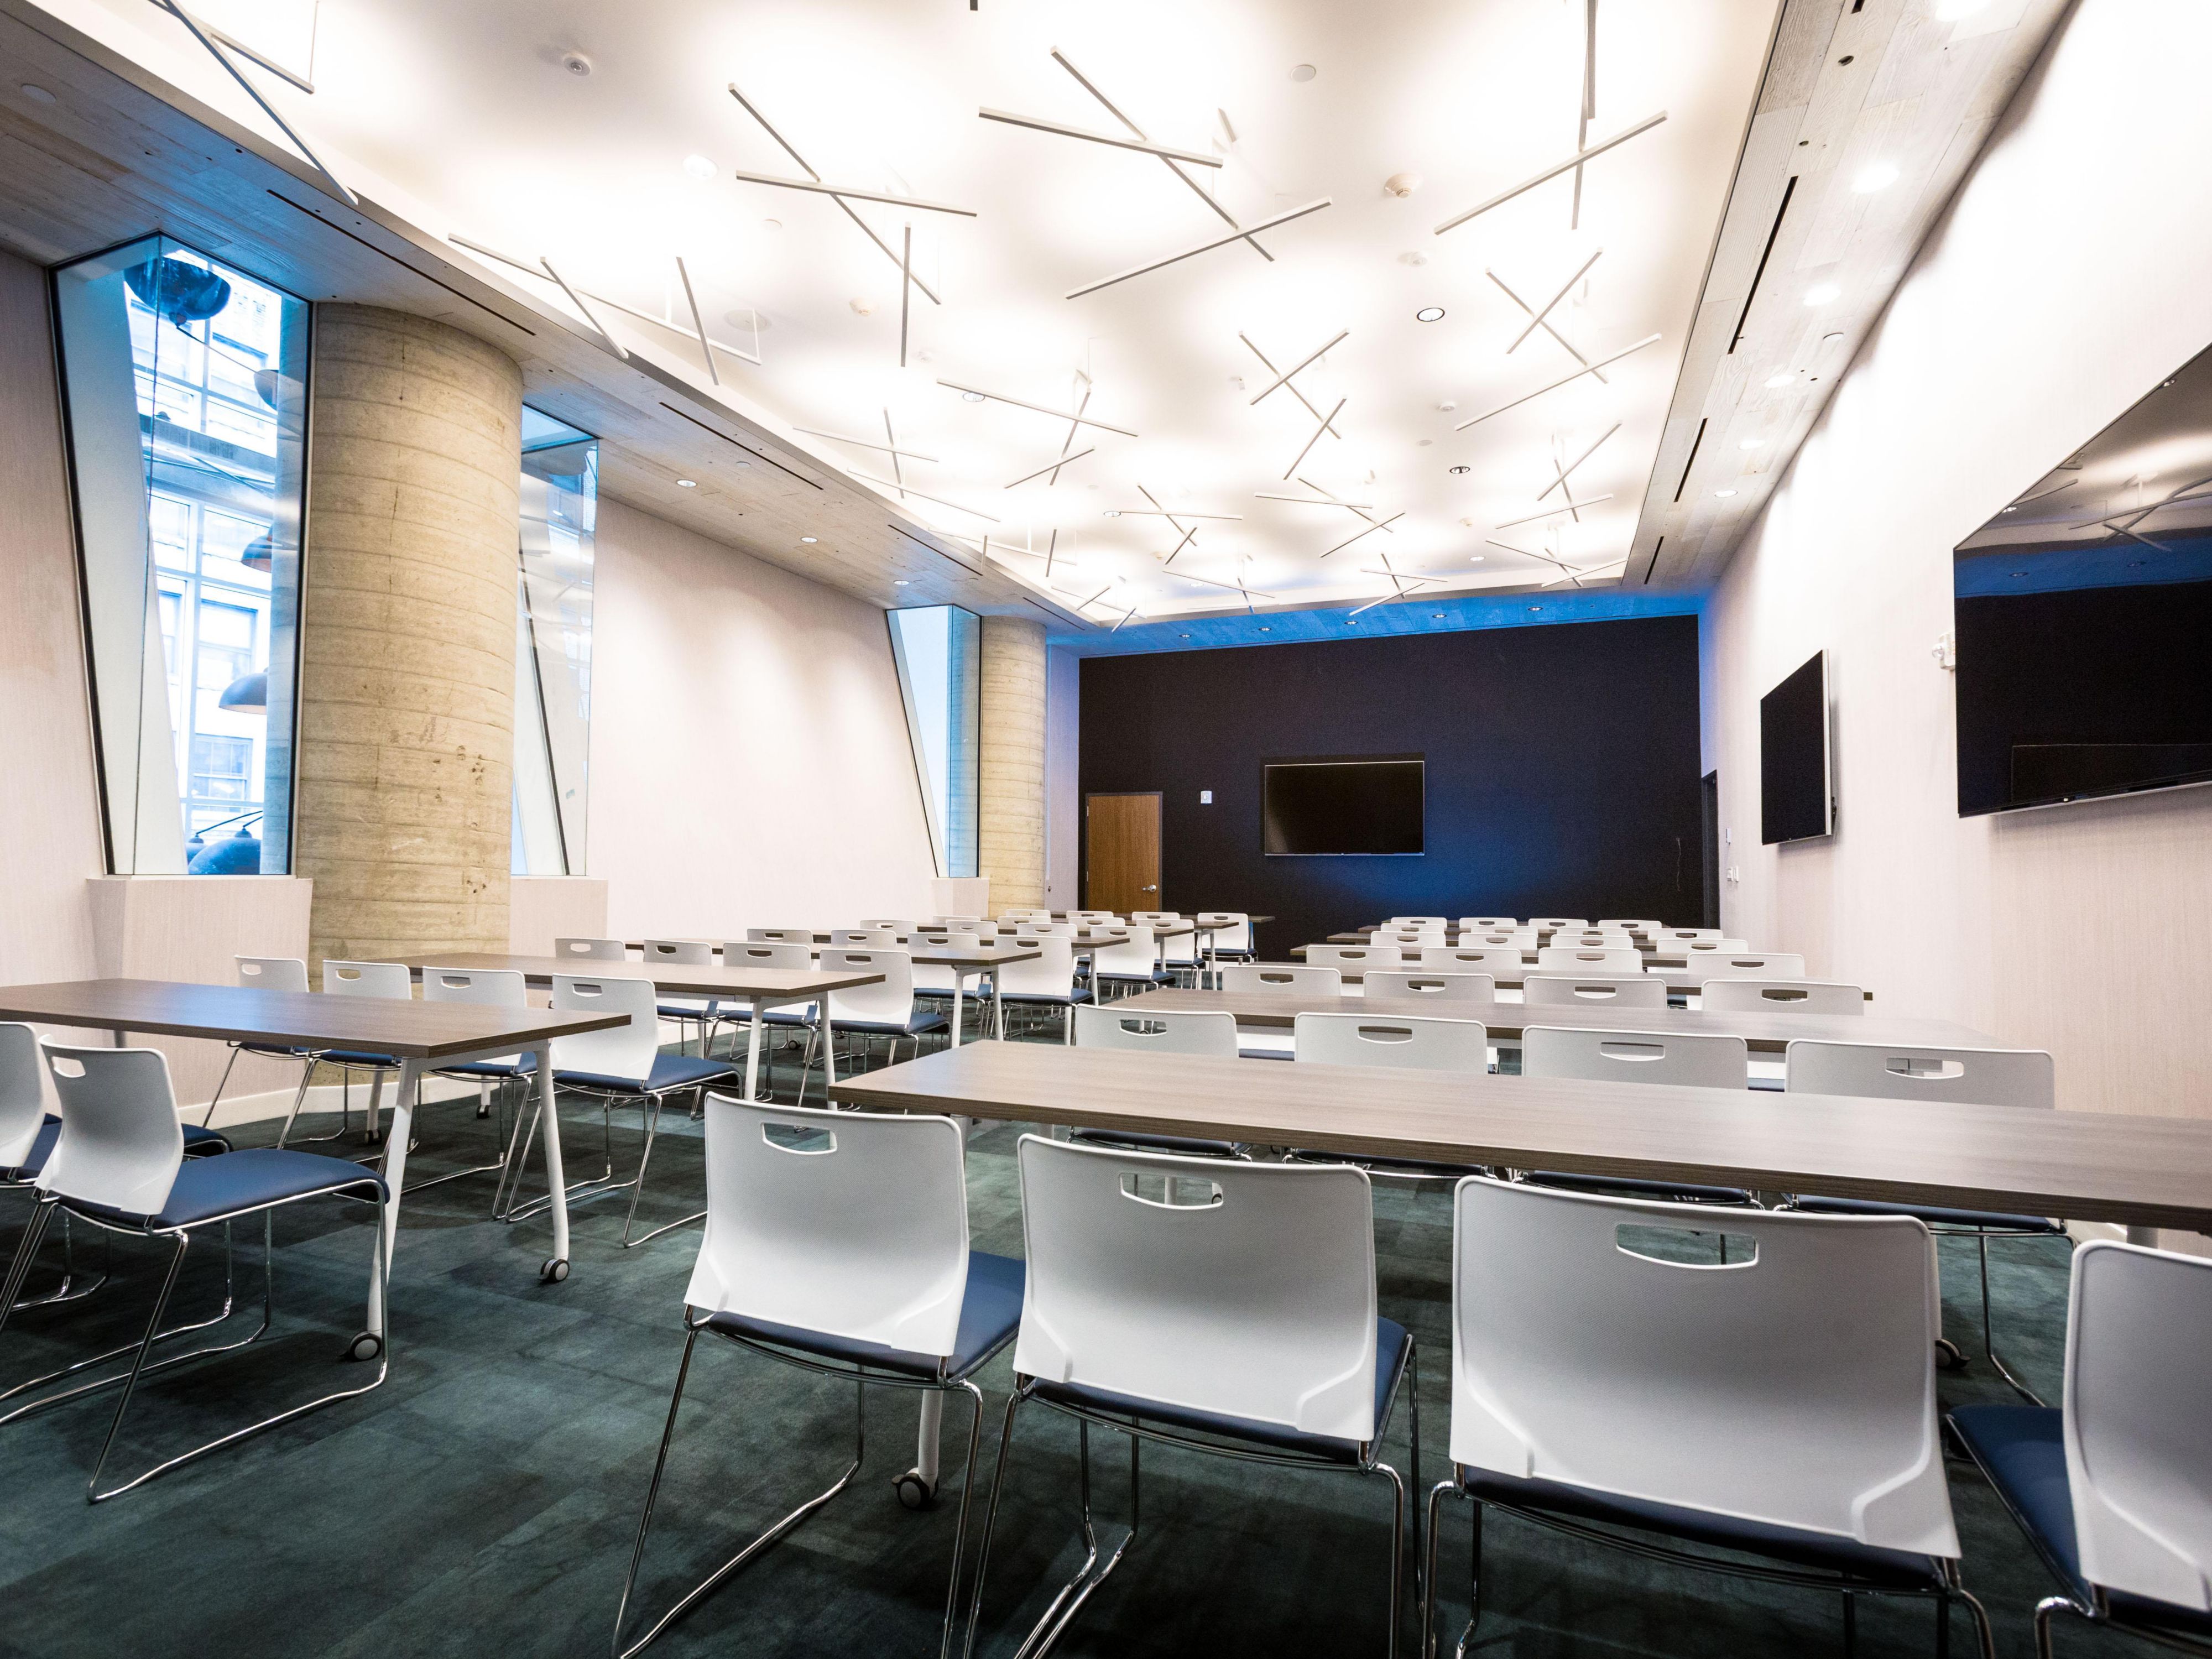 Offering 1,100sqft of flexible meeting space the Hudson Room can accommodate up to 60 guests in most configurations.  High ceilings, natural light, plug and play technology and our dedicated Meeting Director will ensure that your next event exceeds your expectations.  Check our offers page for any current promotions and book with us today.